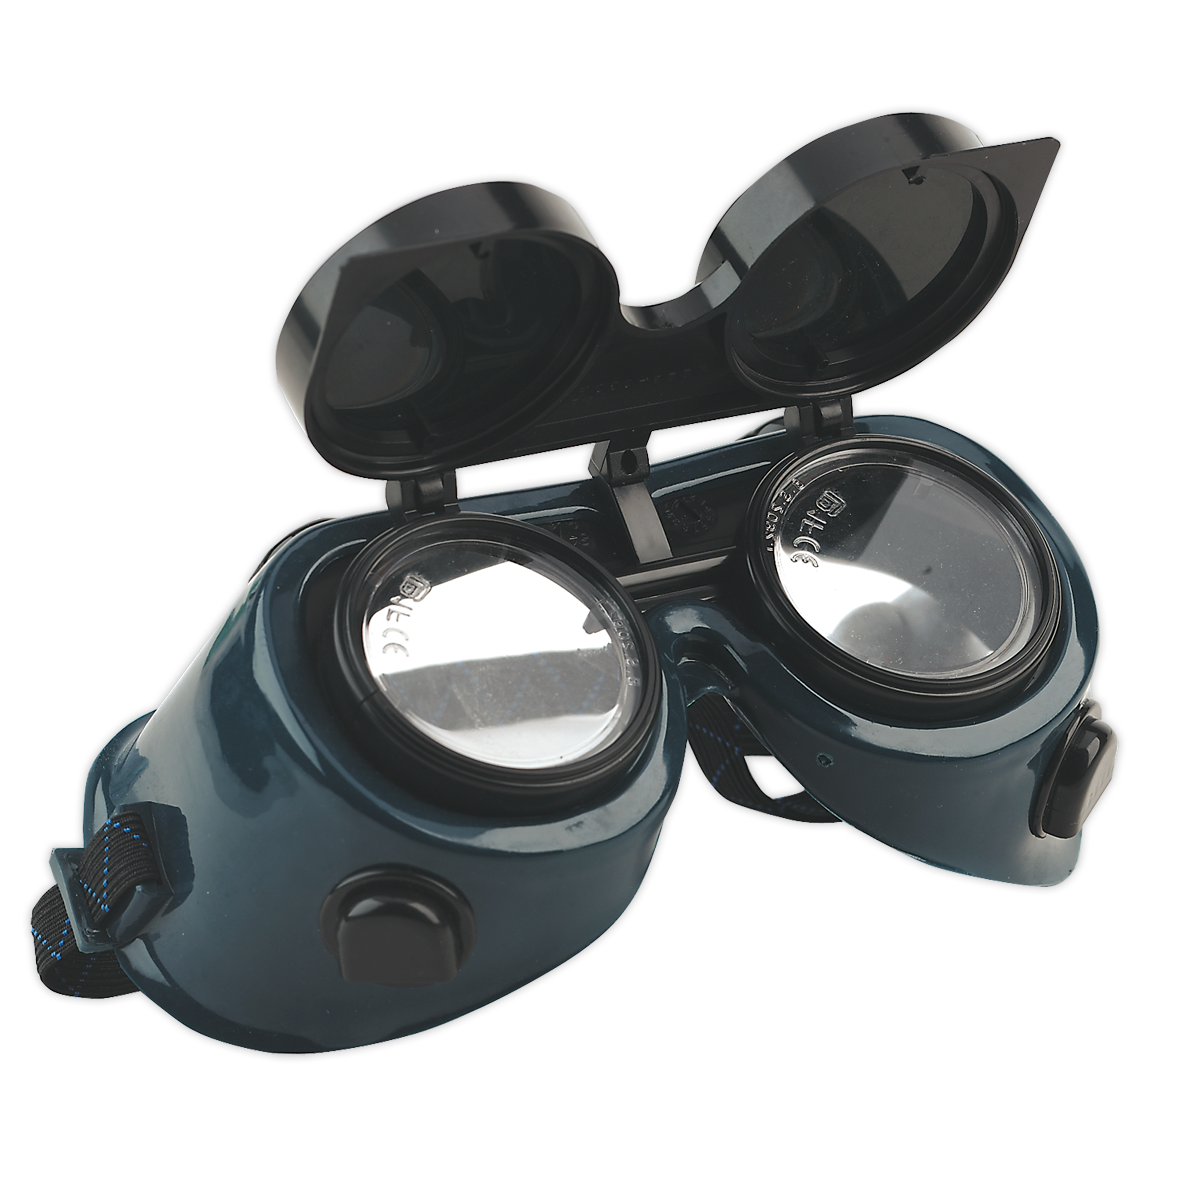 Sealey SSP6 Gas Welding Goggles with Flip-Up Lenses